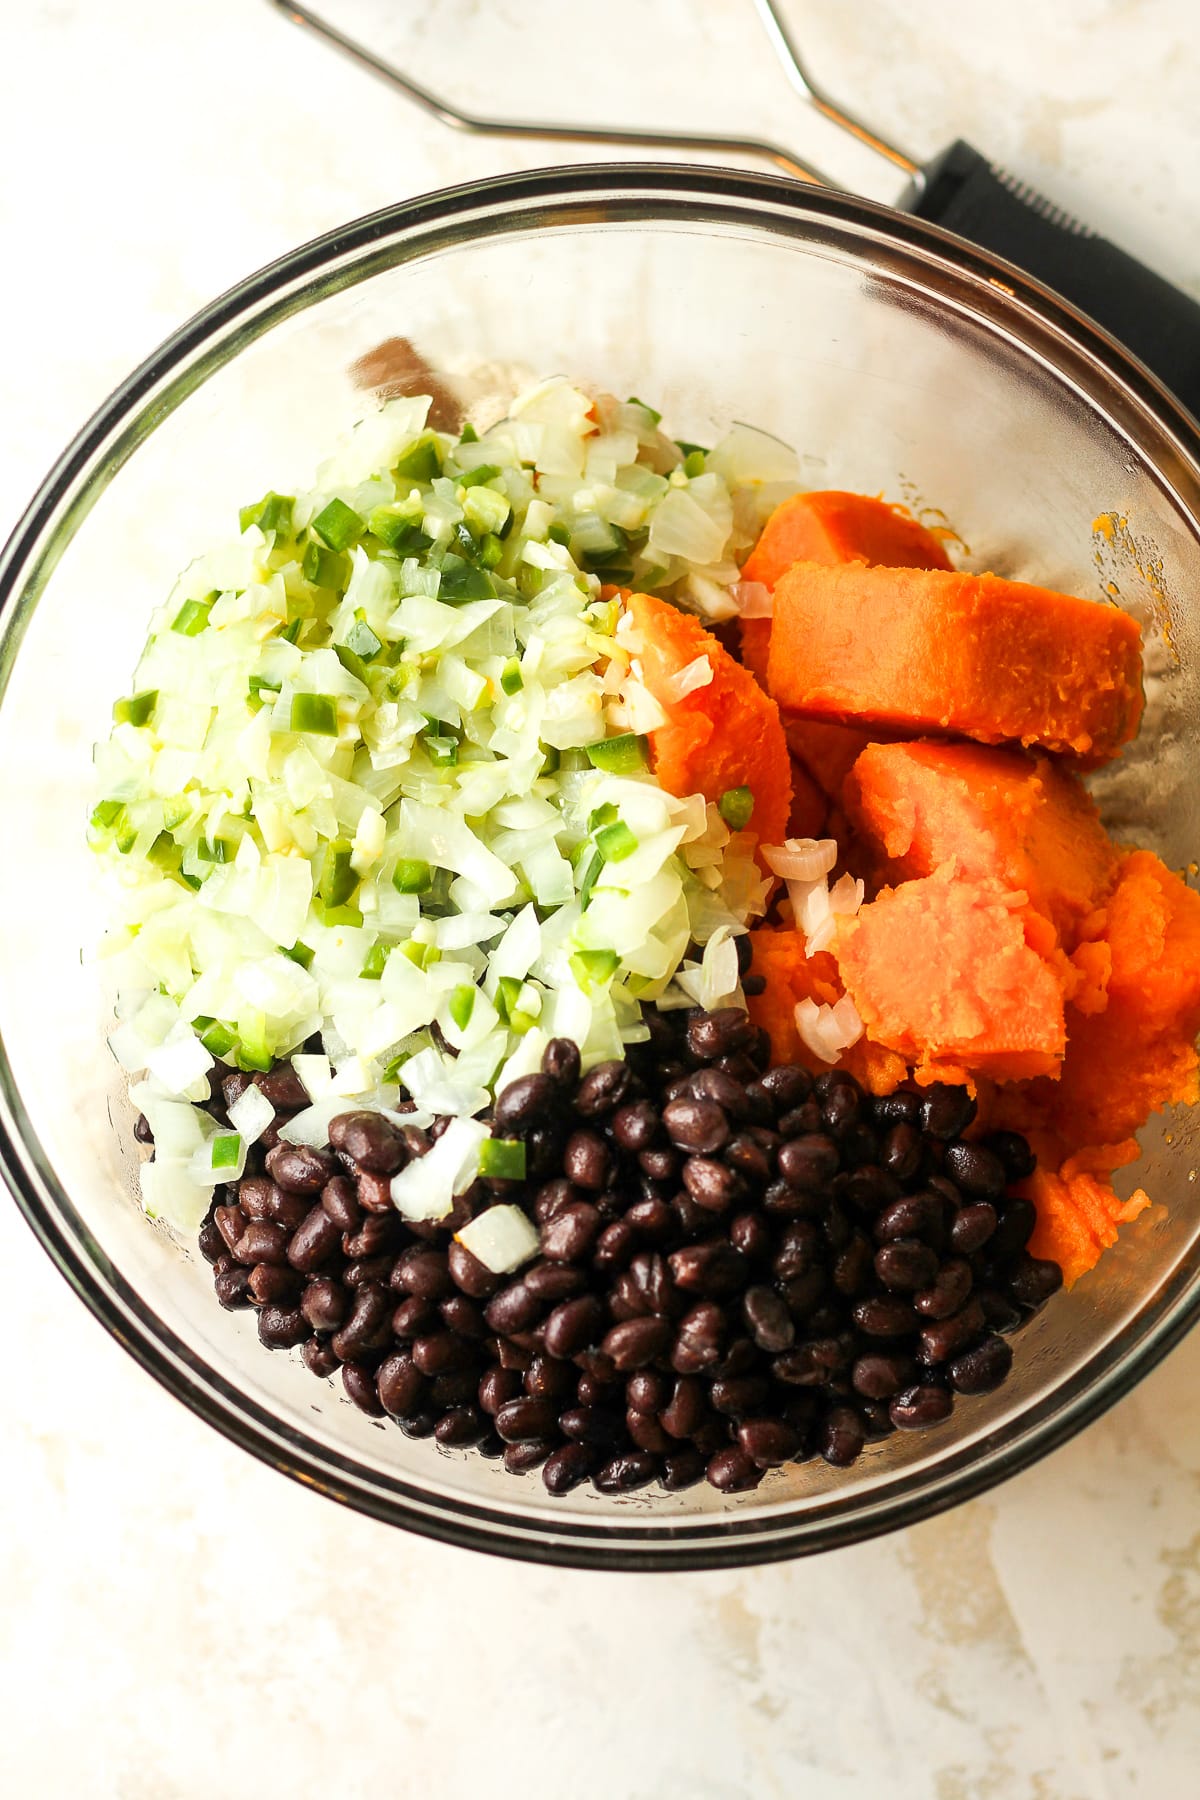 A bowl of the cooked sweet potatoes, sautéed veggies, and black beans.